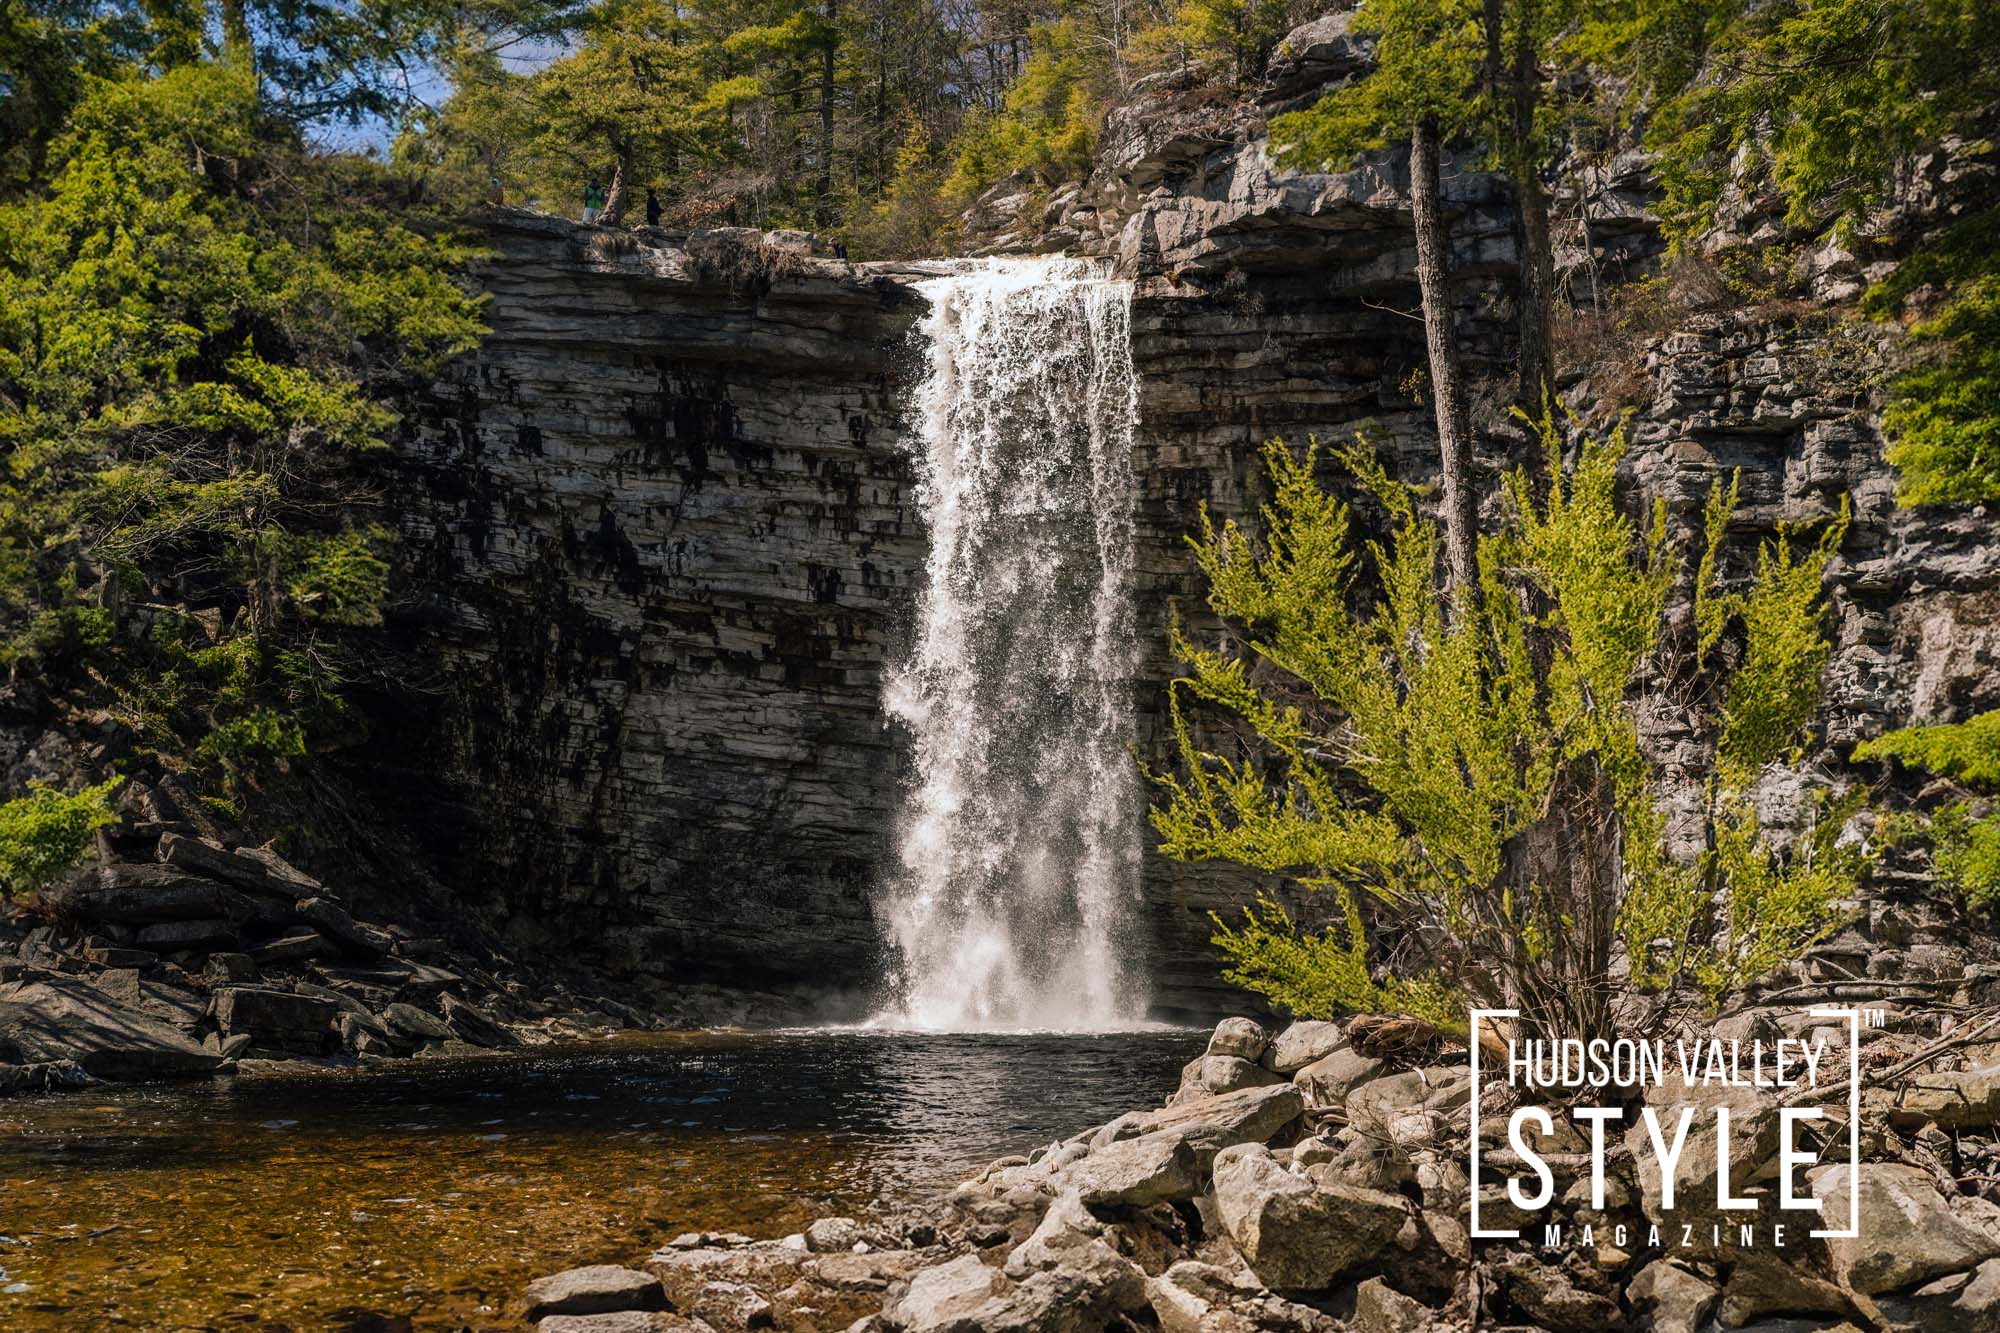 Breathe Deep and Take a Step: Top Hikes in the Hudson Valley and Catskills – Hiking Adventures with Coach Maxwell Alexander – Presented by Alluvion Vacations – Luxury Wellness-Focused Getaways